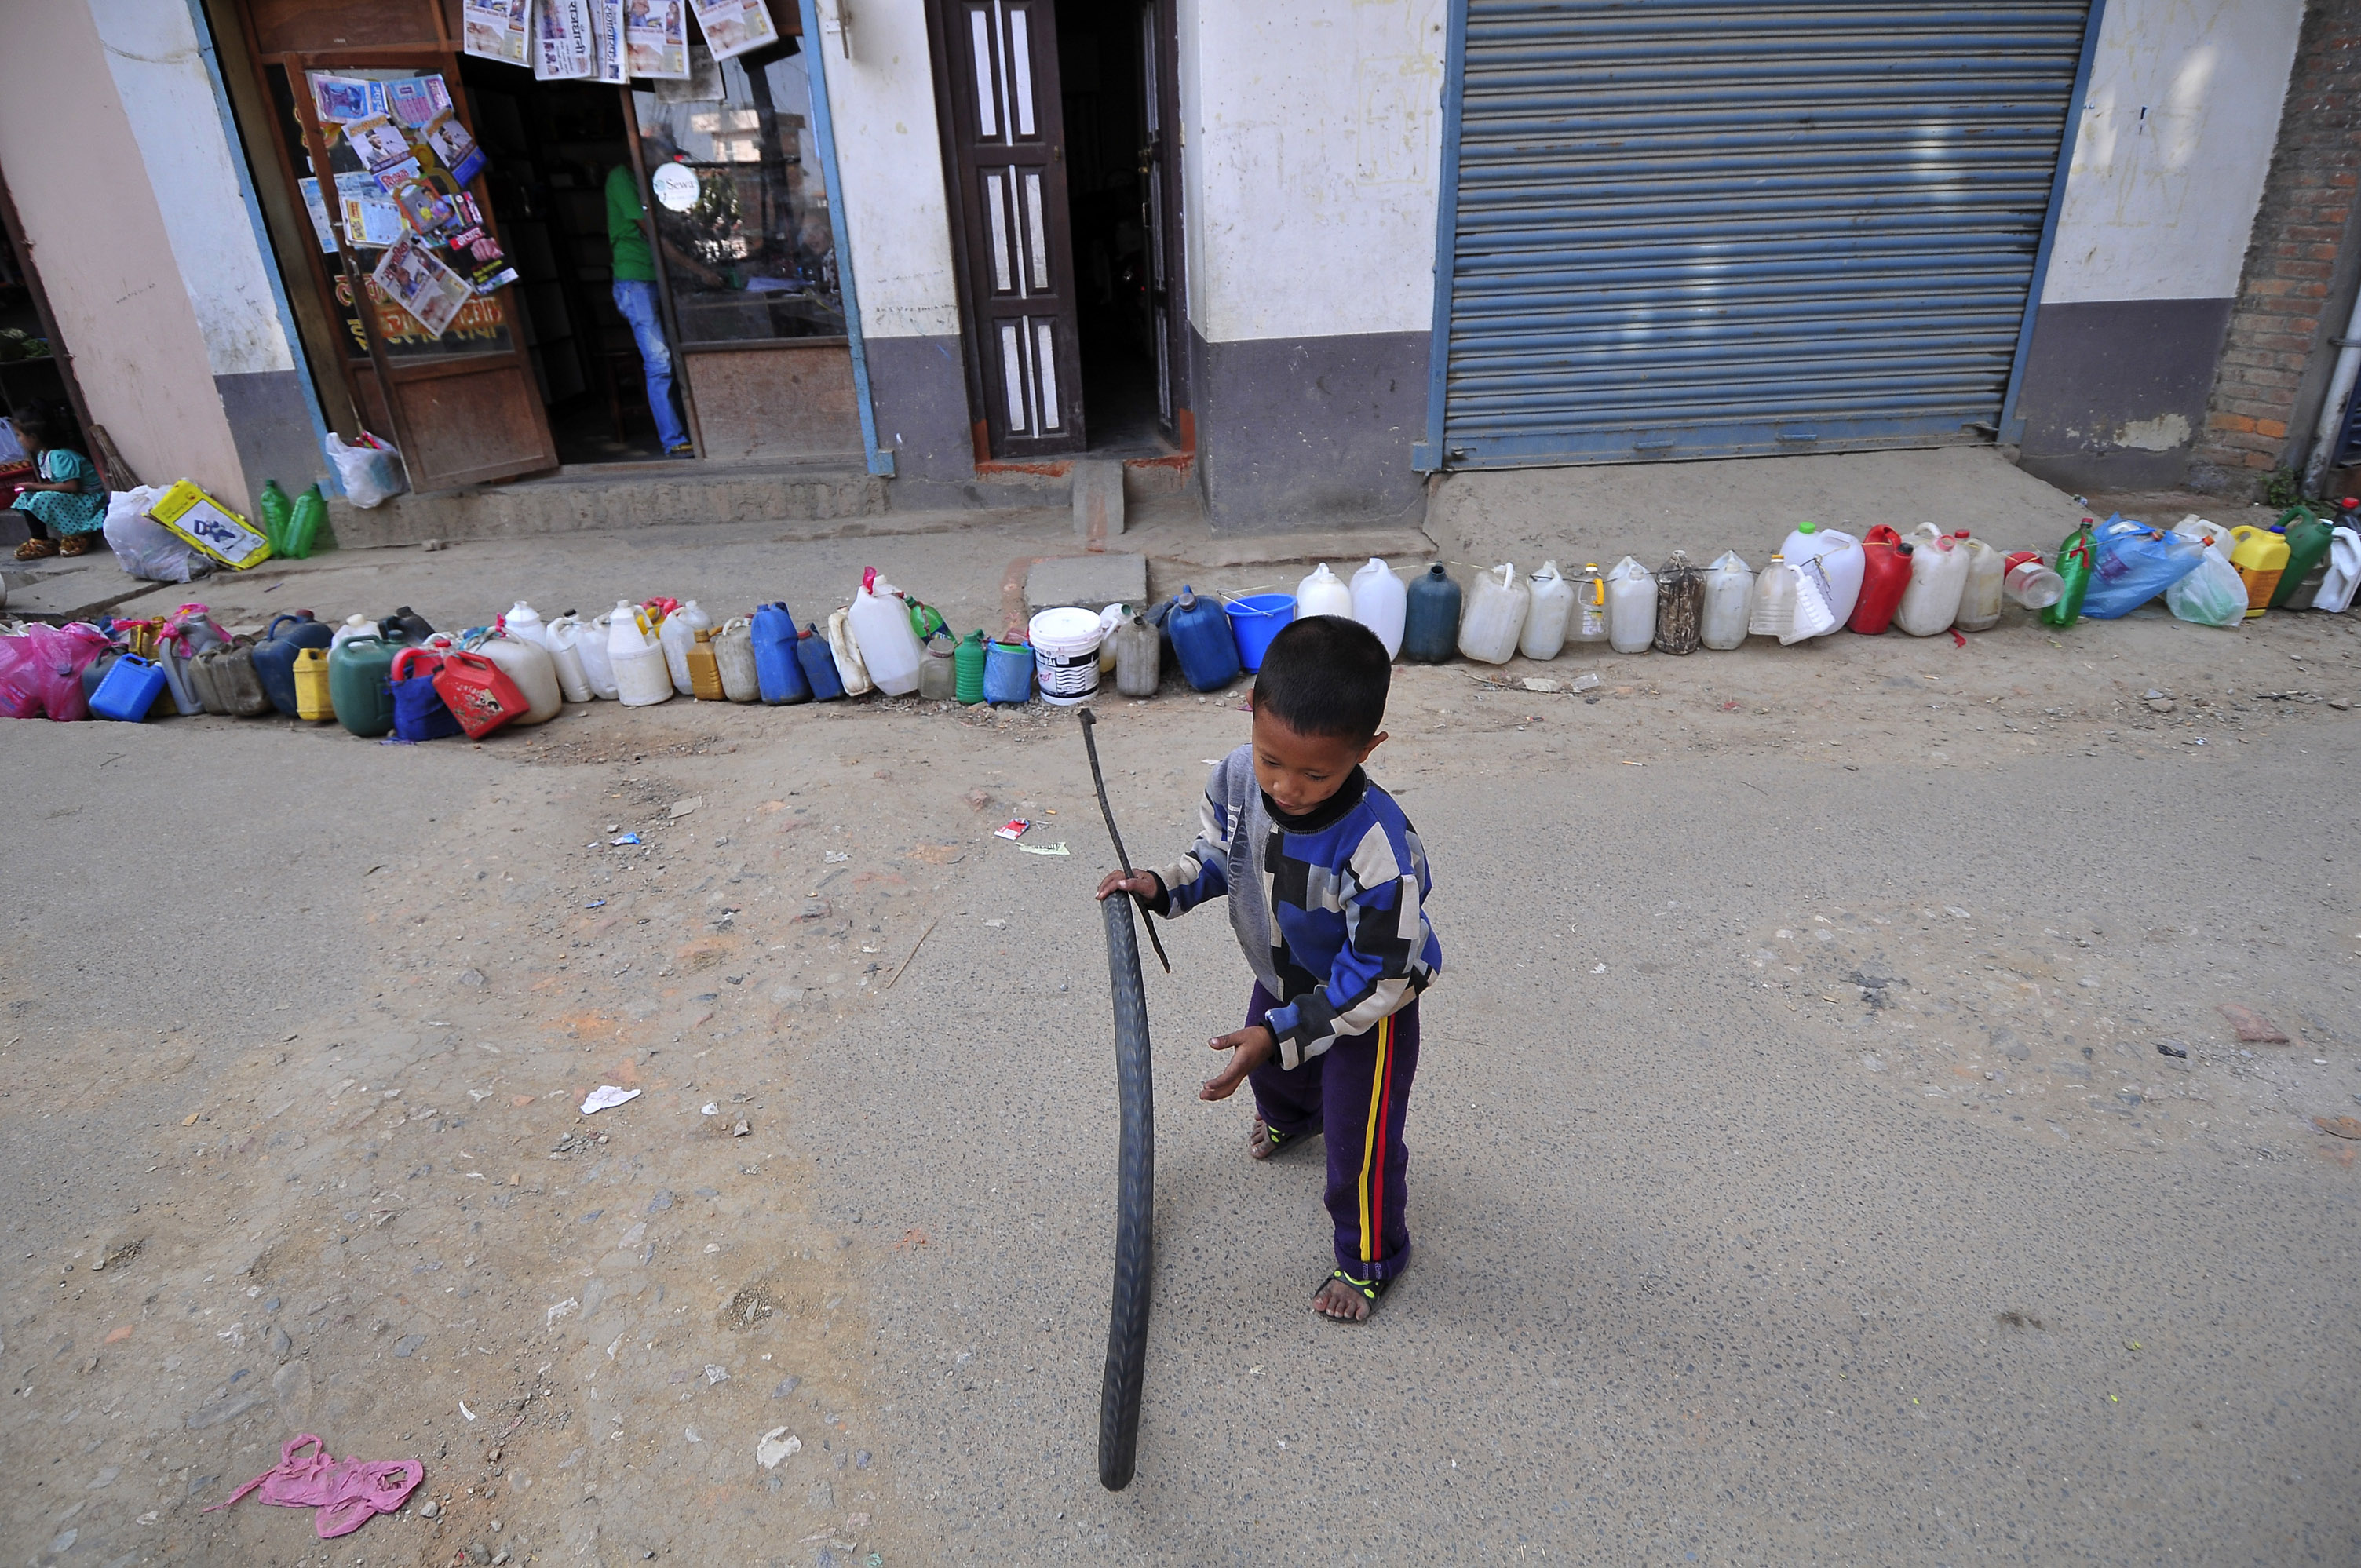 A Nepalese child plays while waiting for his parents' time to buy kerosene. Protests at the border with India have blocked the transportation of fuel and daily commodities to Nepal. (Narayan Maharjan—Pacific Press/LightRocket/Getty Images)